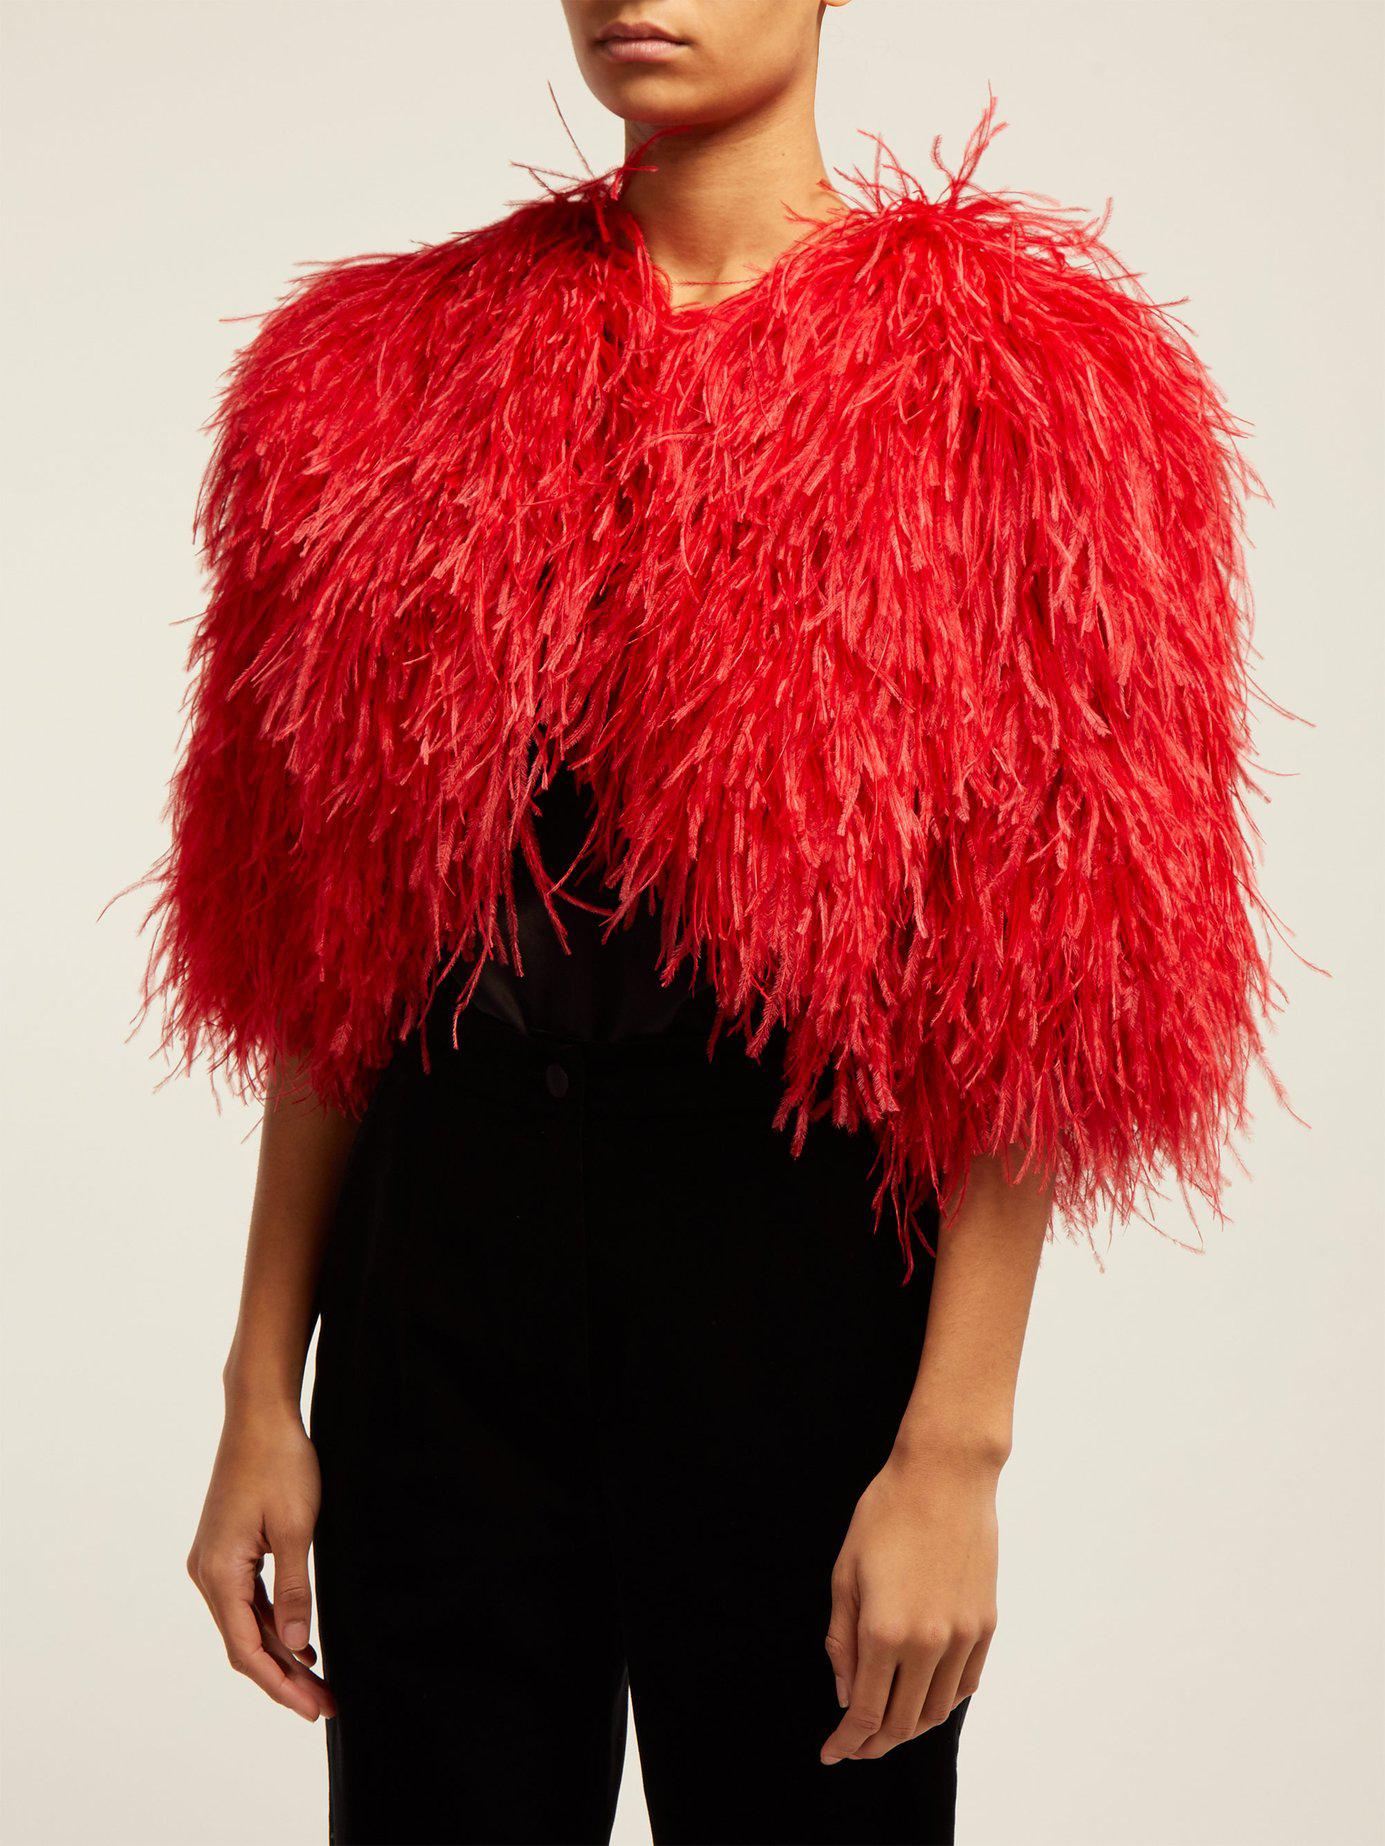 Dolce & Gabbana Satin Cropped Feather Bolero Jacket in Red - Lyst